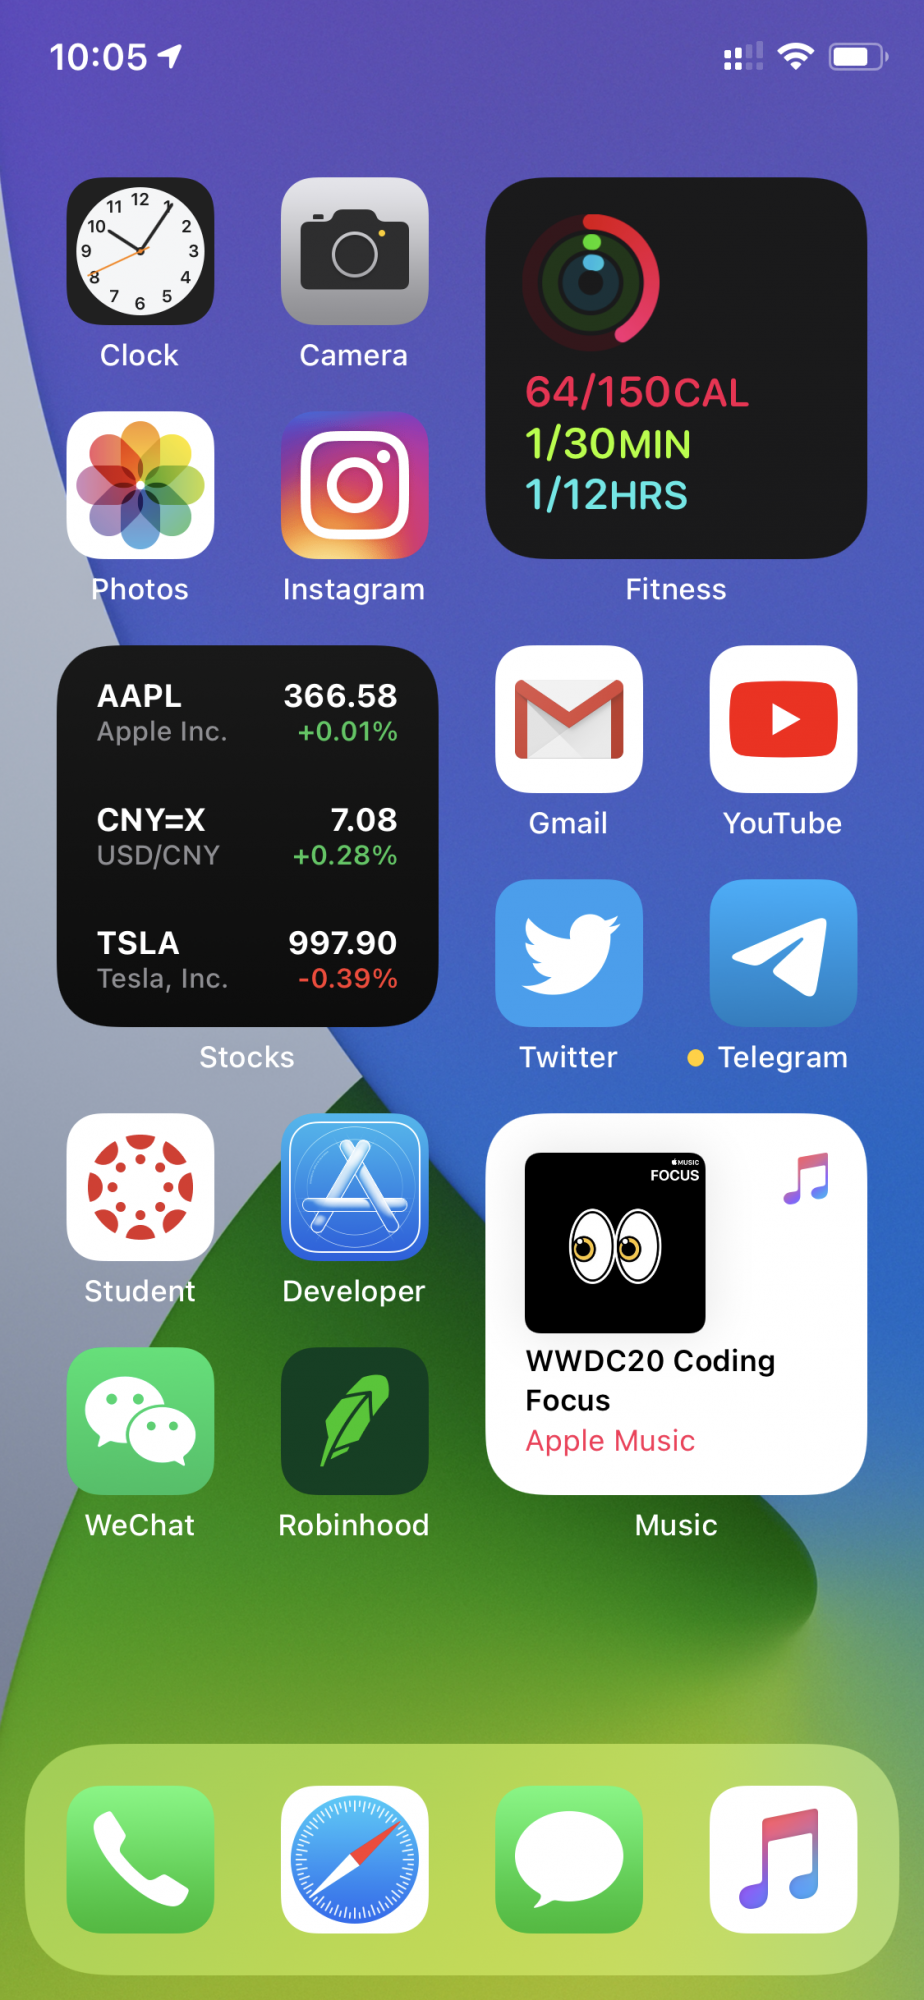 Post your iOS 14 home screen layout | Page 6 | MacRumors Forums